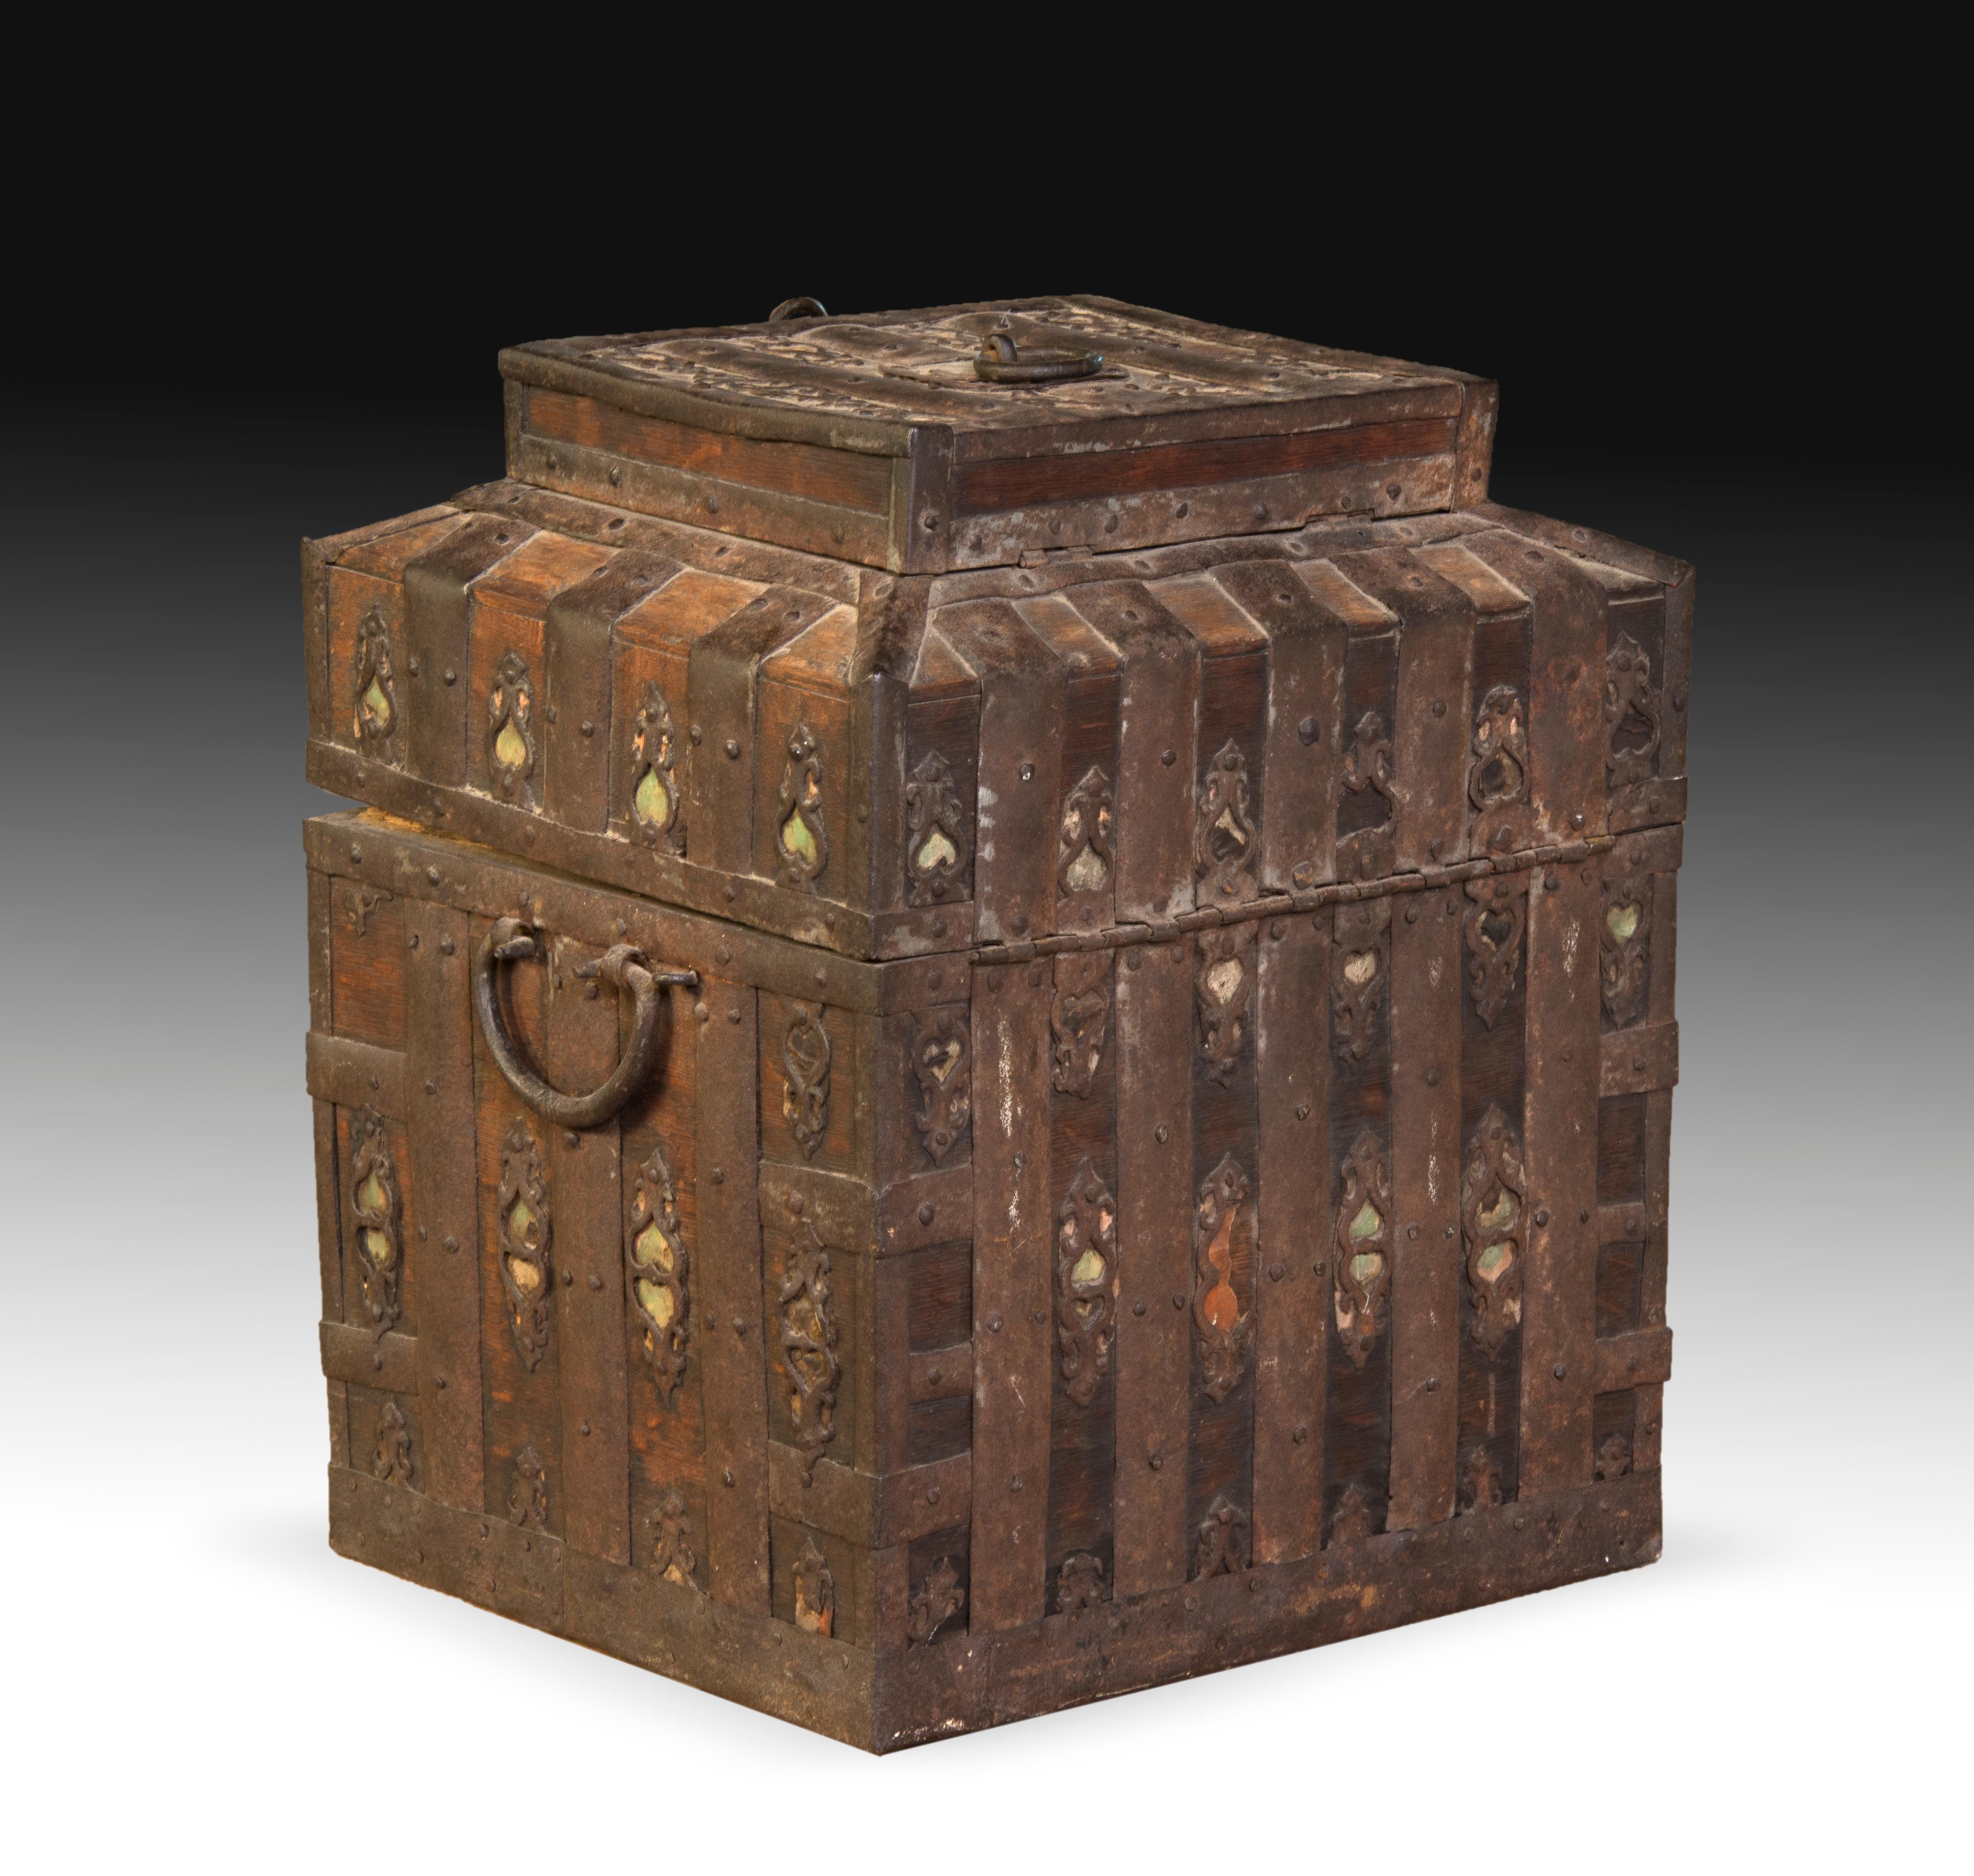 Russian Ironbound Strongbox or Chest, Wrought Iron, Wood, Possibly Russia, 17th Century